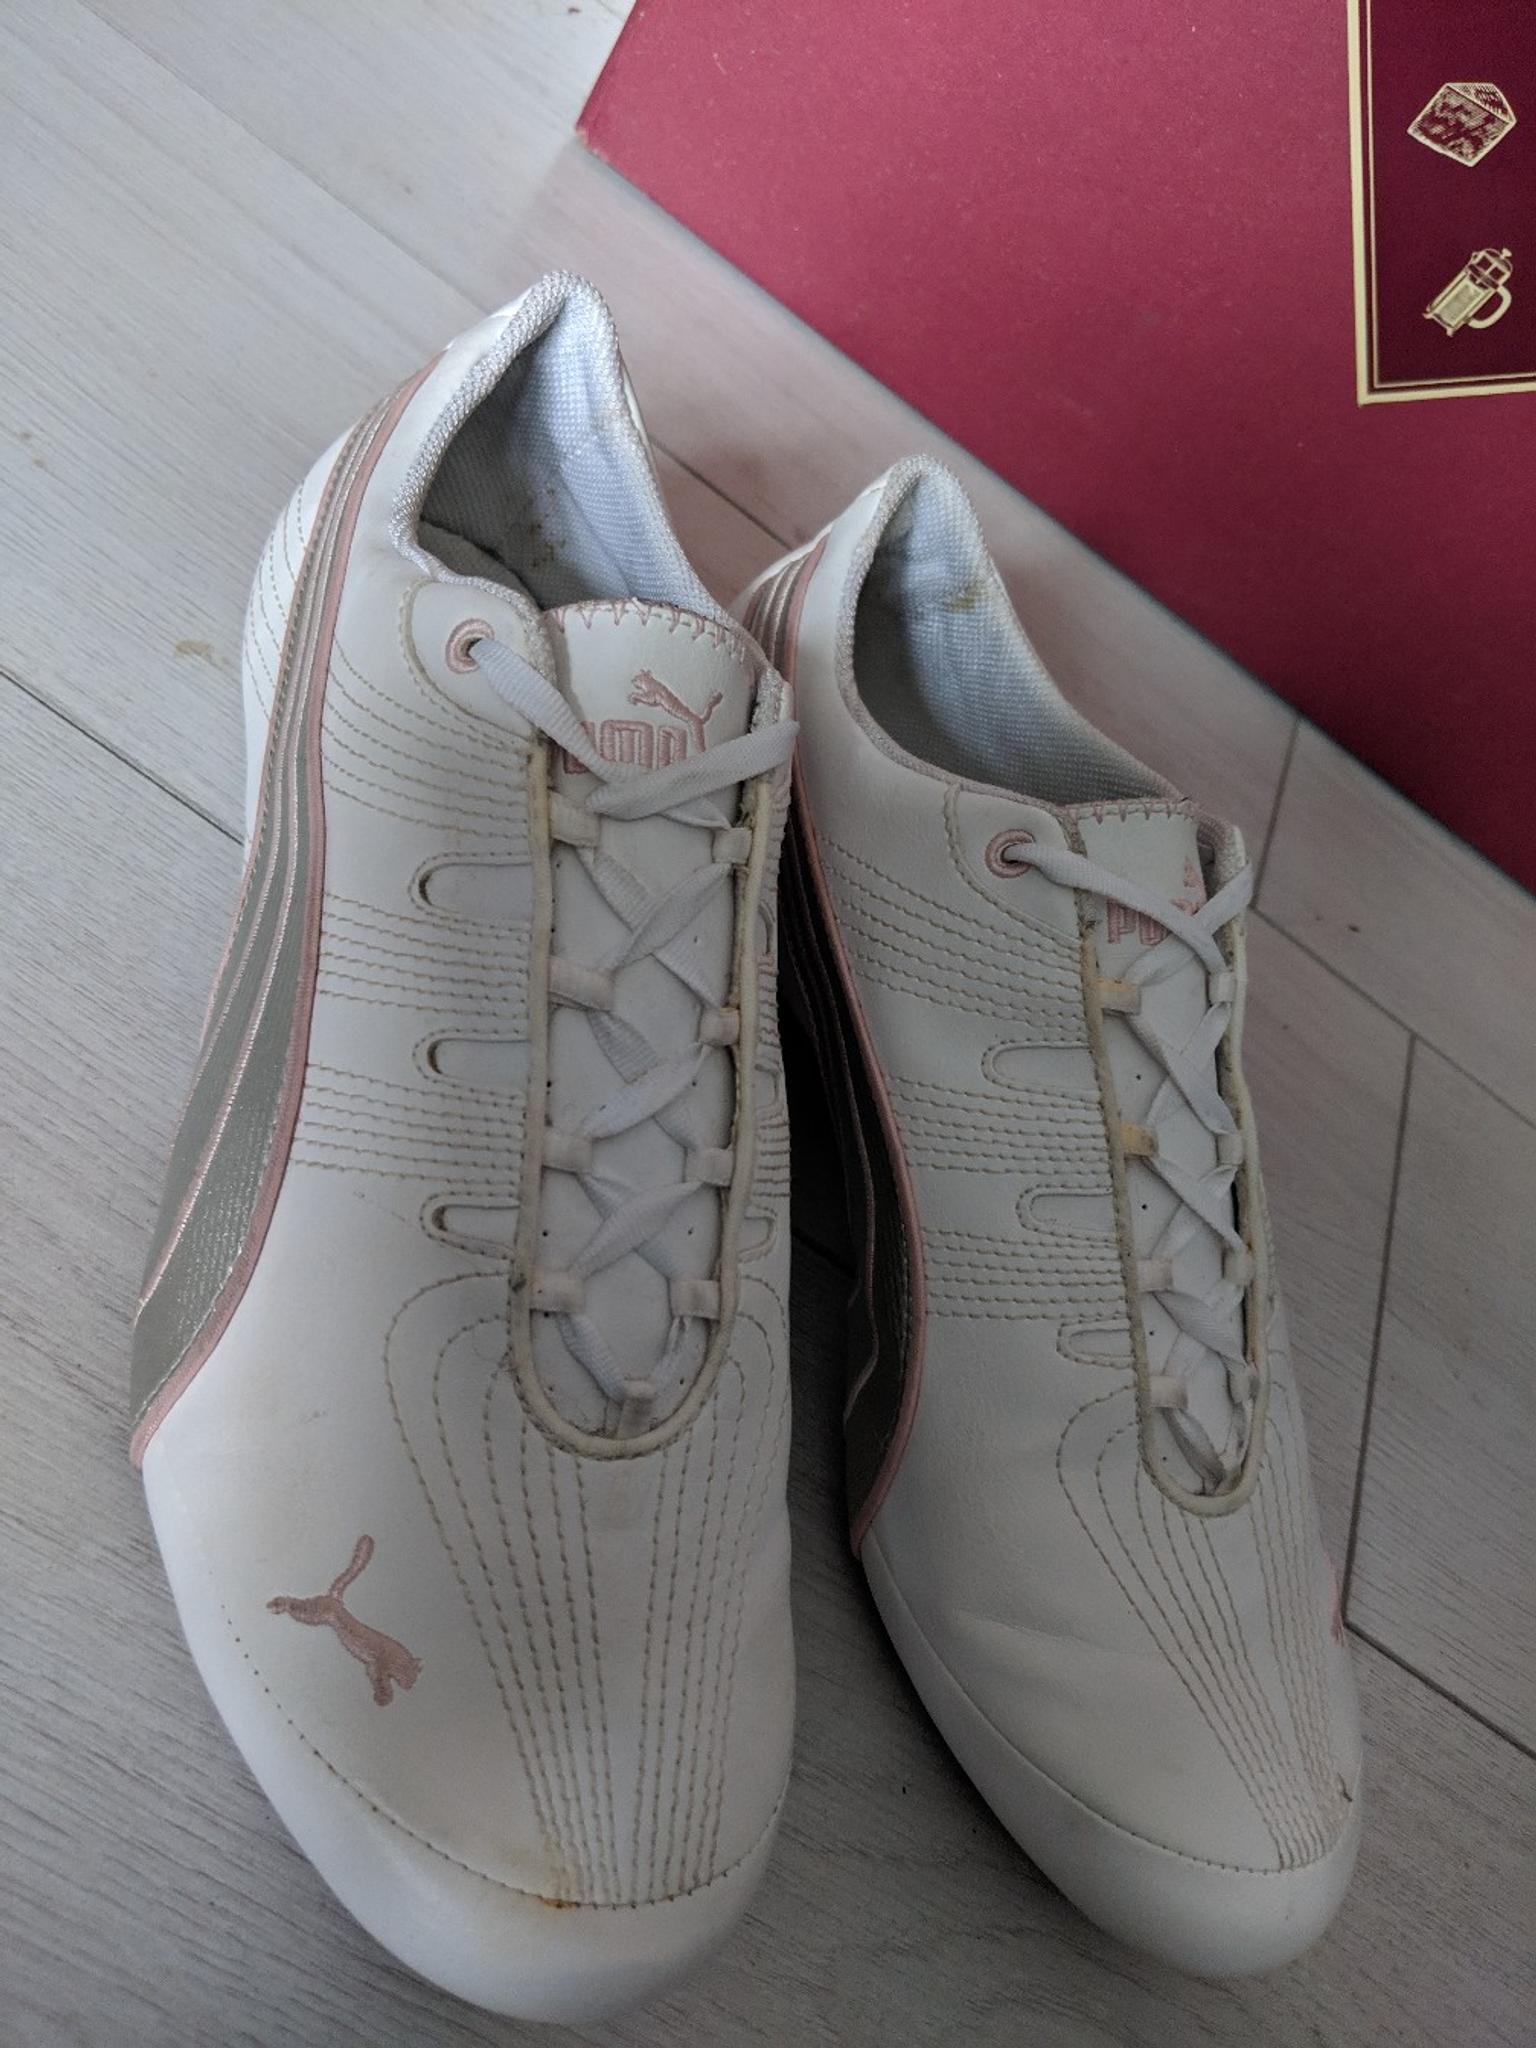 Womens size 8 Vintage puma trainers in 